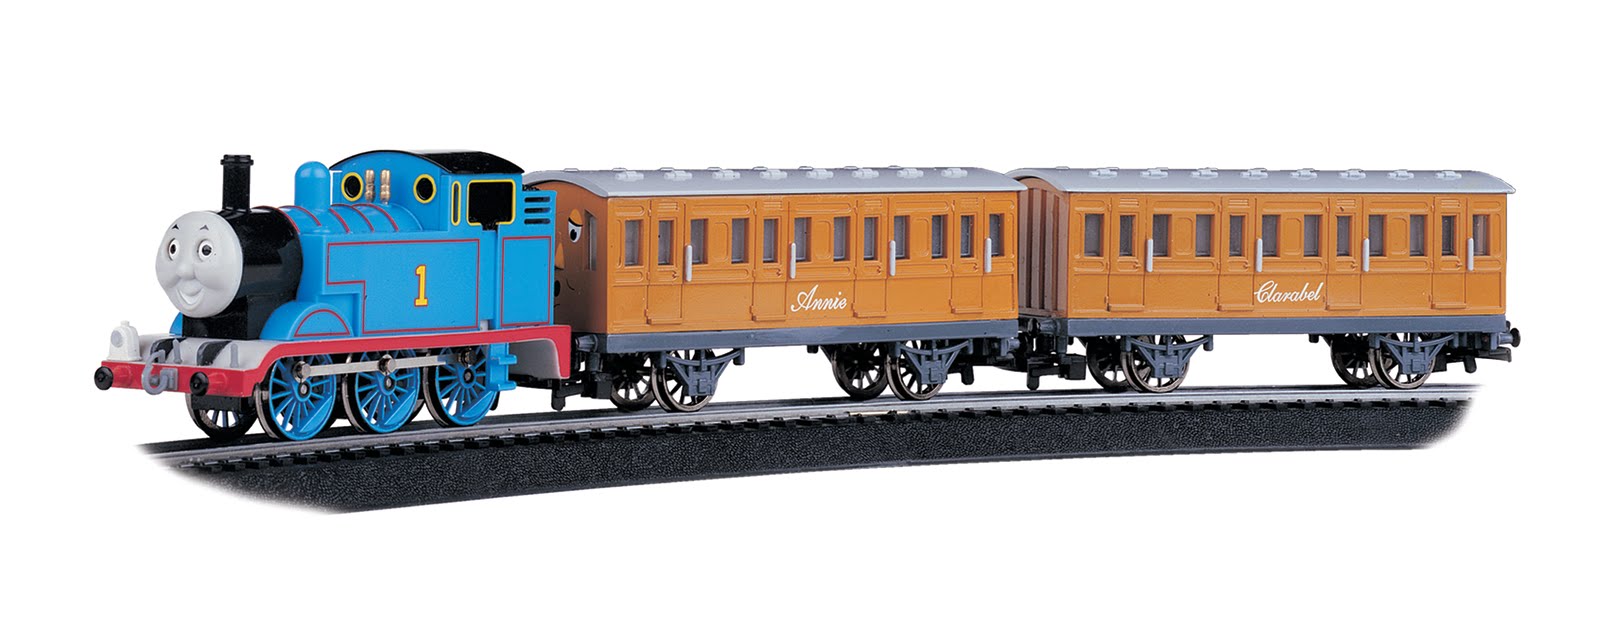  , Wife of 1: Holiday Gift Guide for Him and the Kids: Bachmann Trains